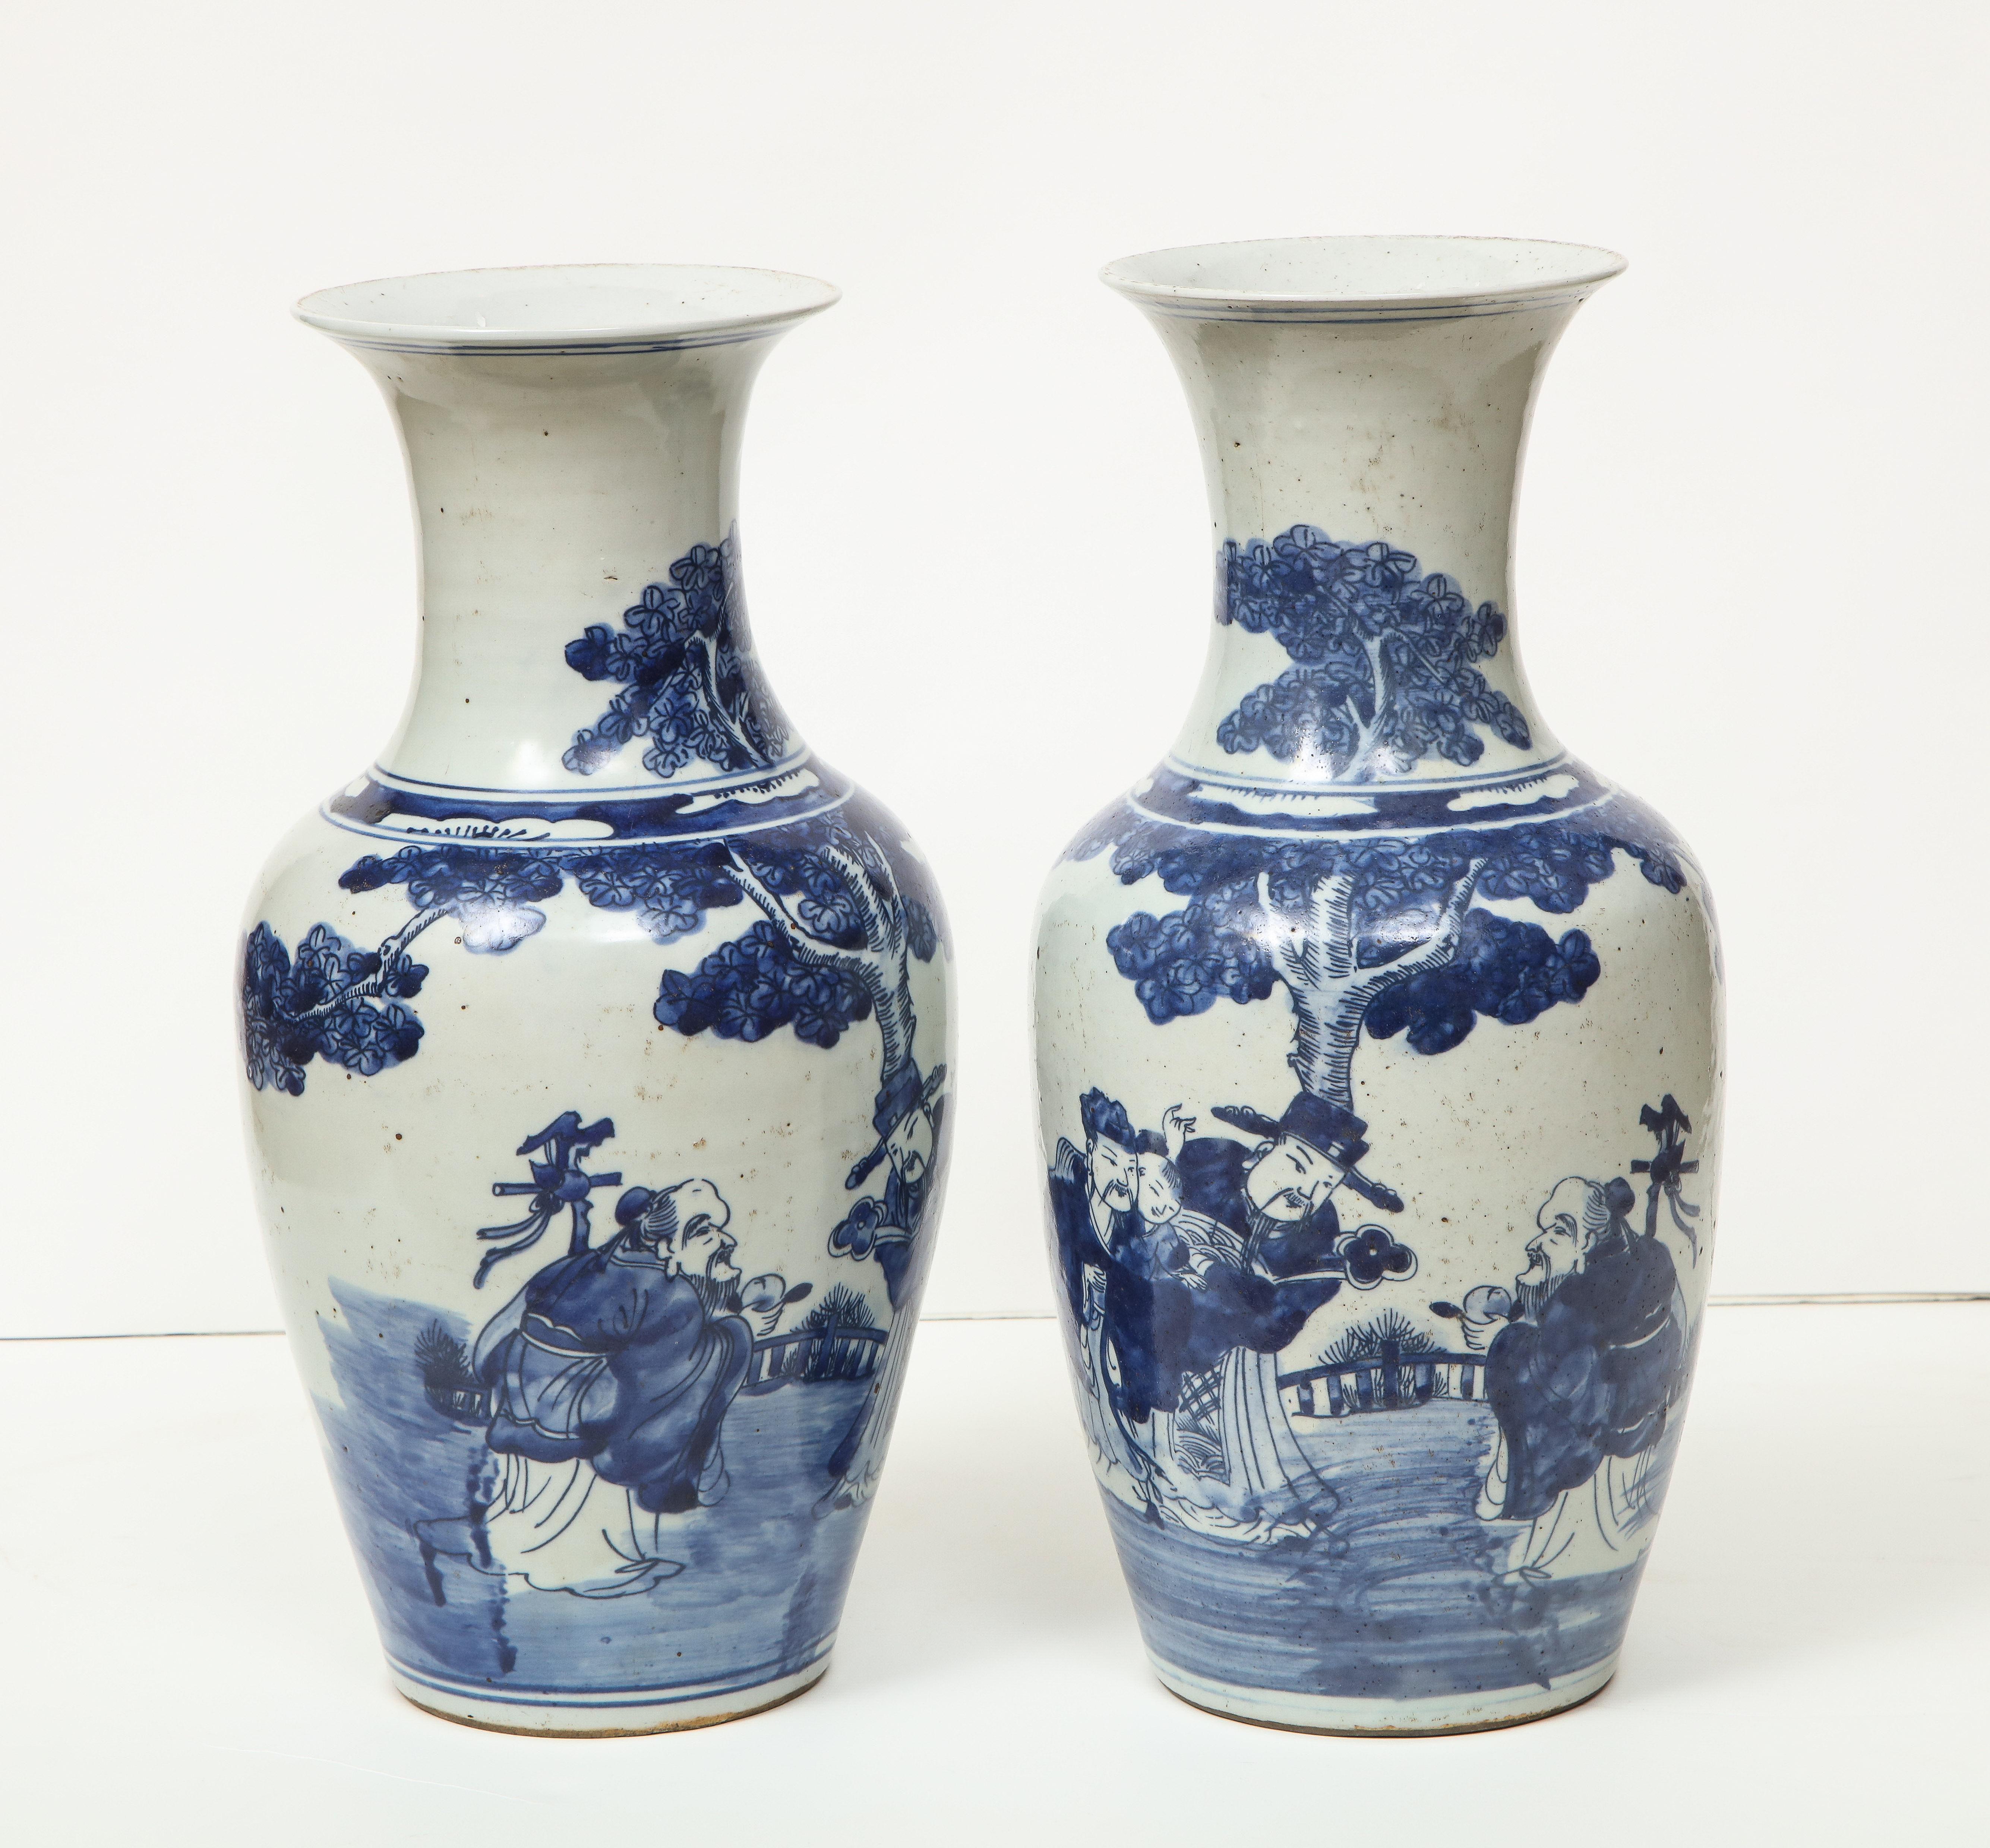 Porcelain Pair of Chinese Export Vases